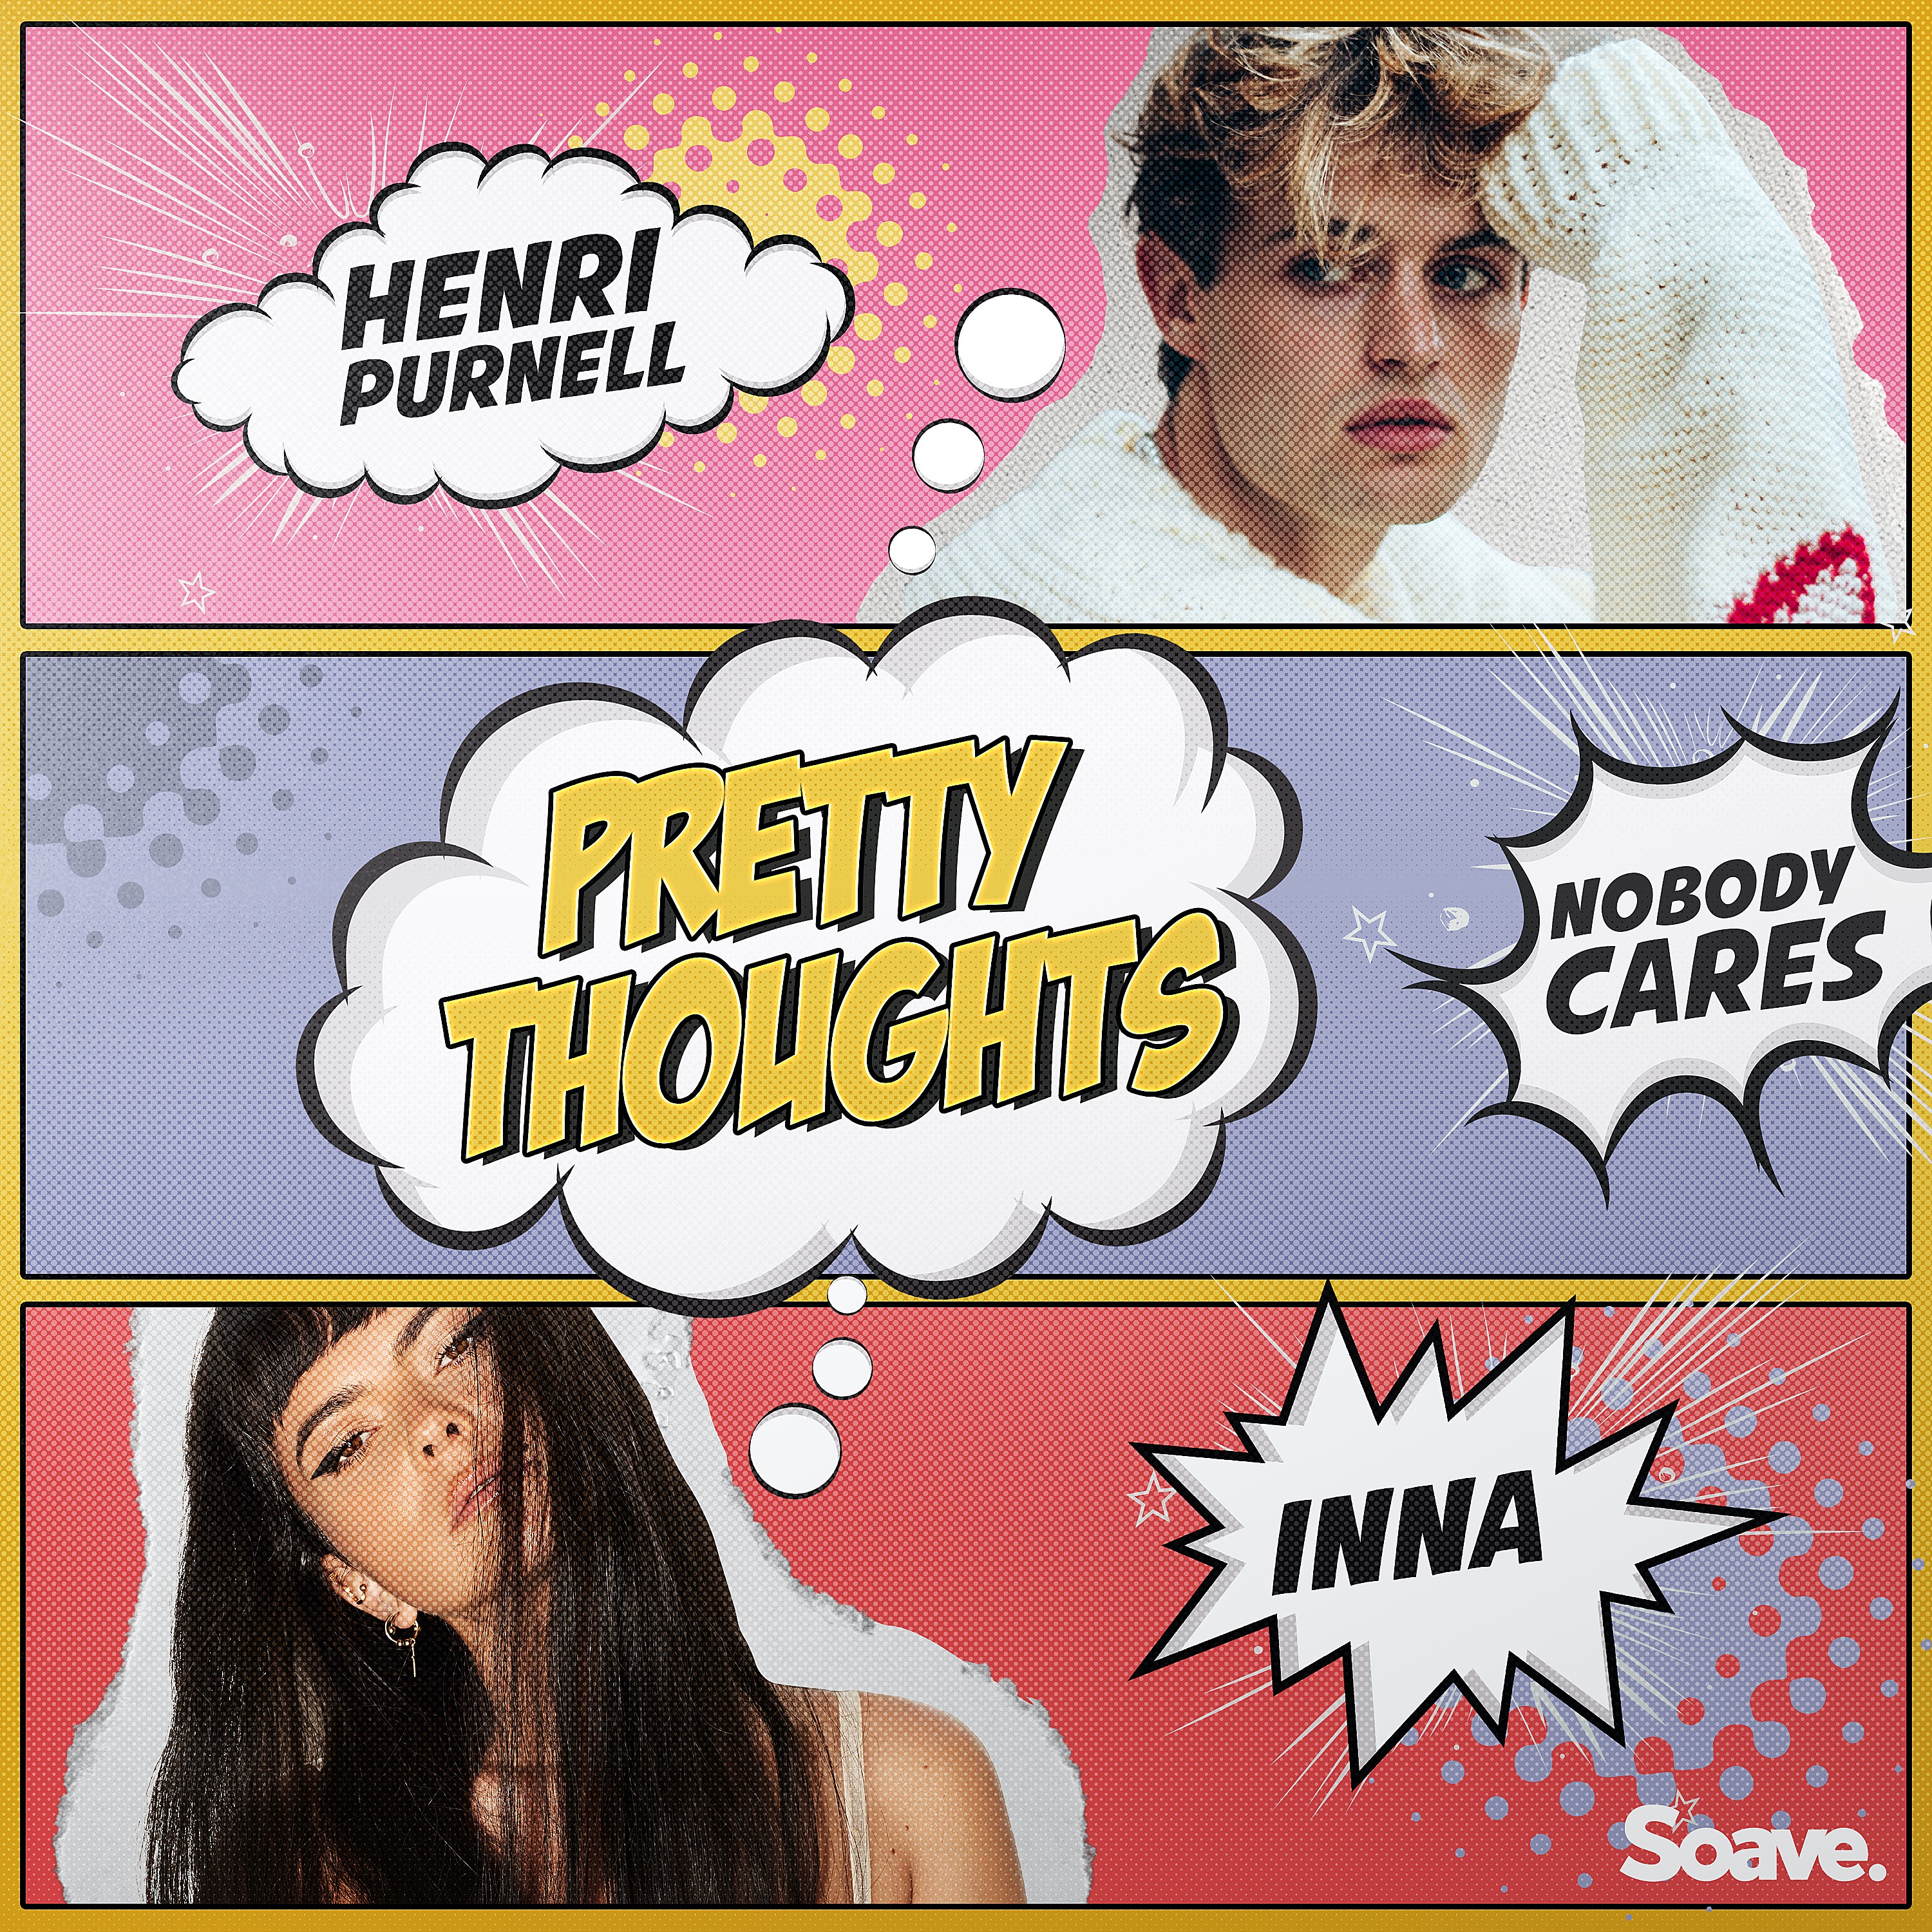 Download Henri Purnell, INNA, Nobody Cares - Pretty Thoughts